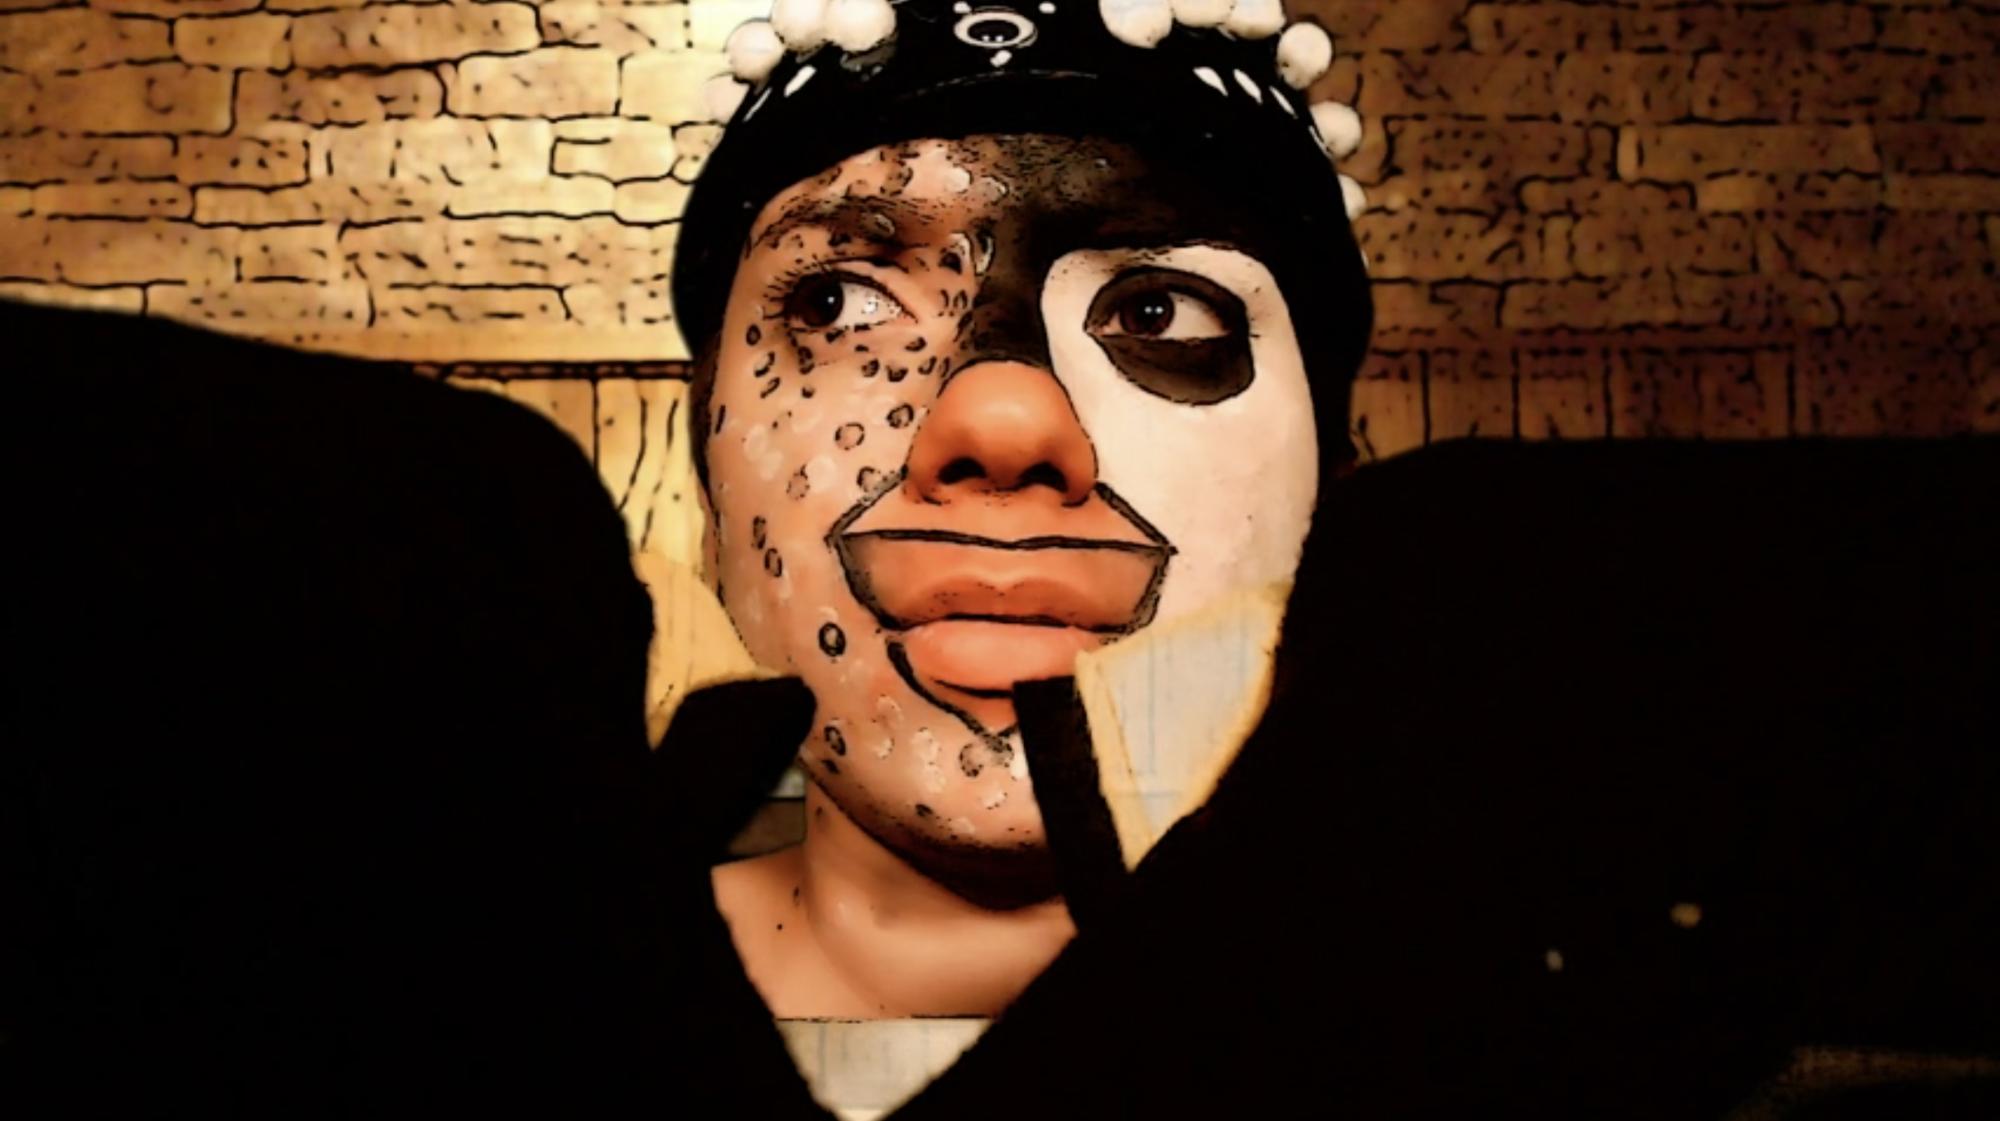 actress with white and black makeup on her face, a hat and flippers on her hands, all pieces of an abstract penguin costume